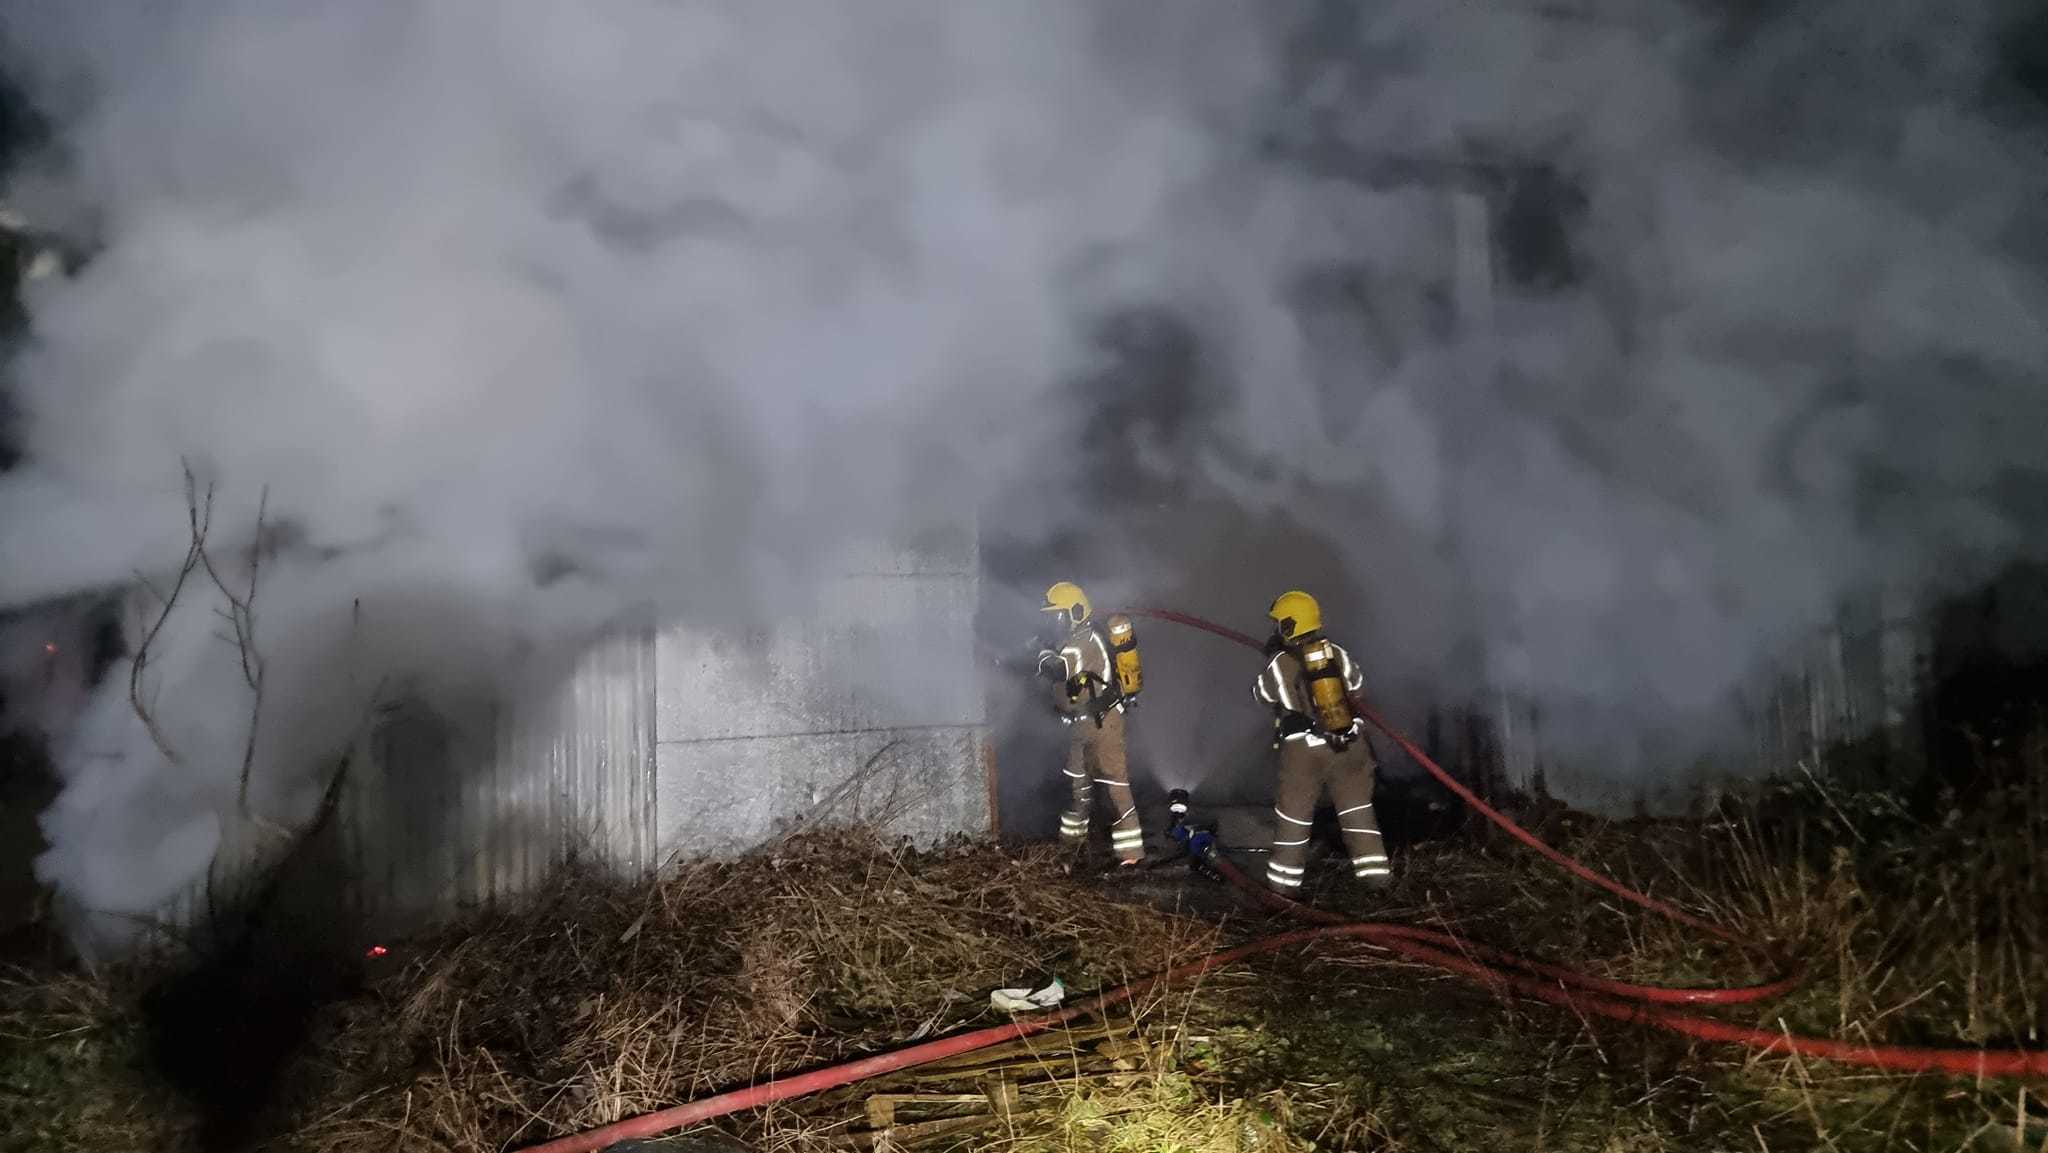 The barn was well alight when crews arrive, the fire station said. Picture: Kington fire station